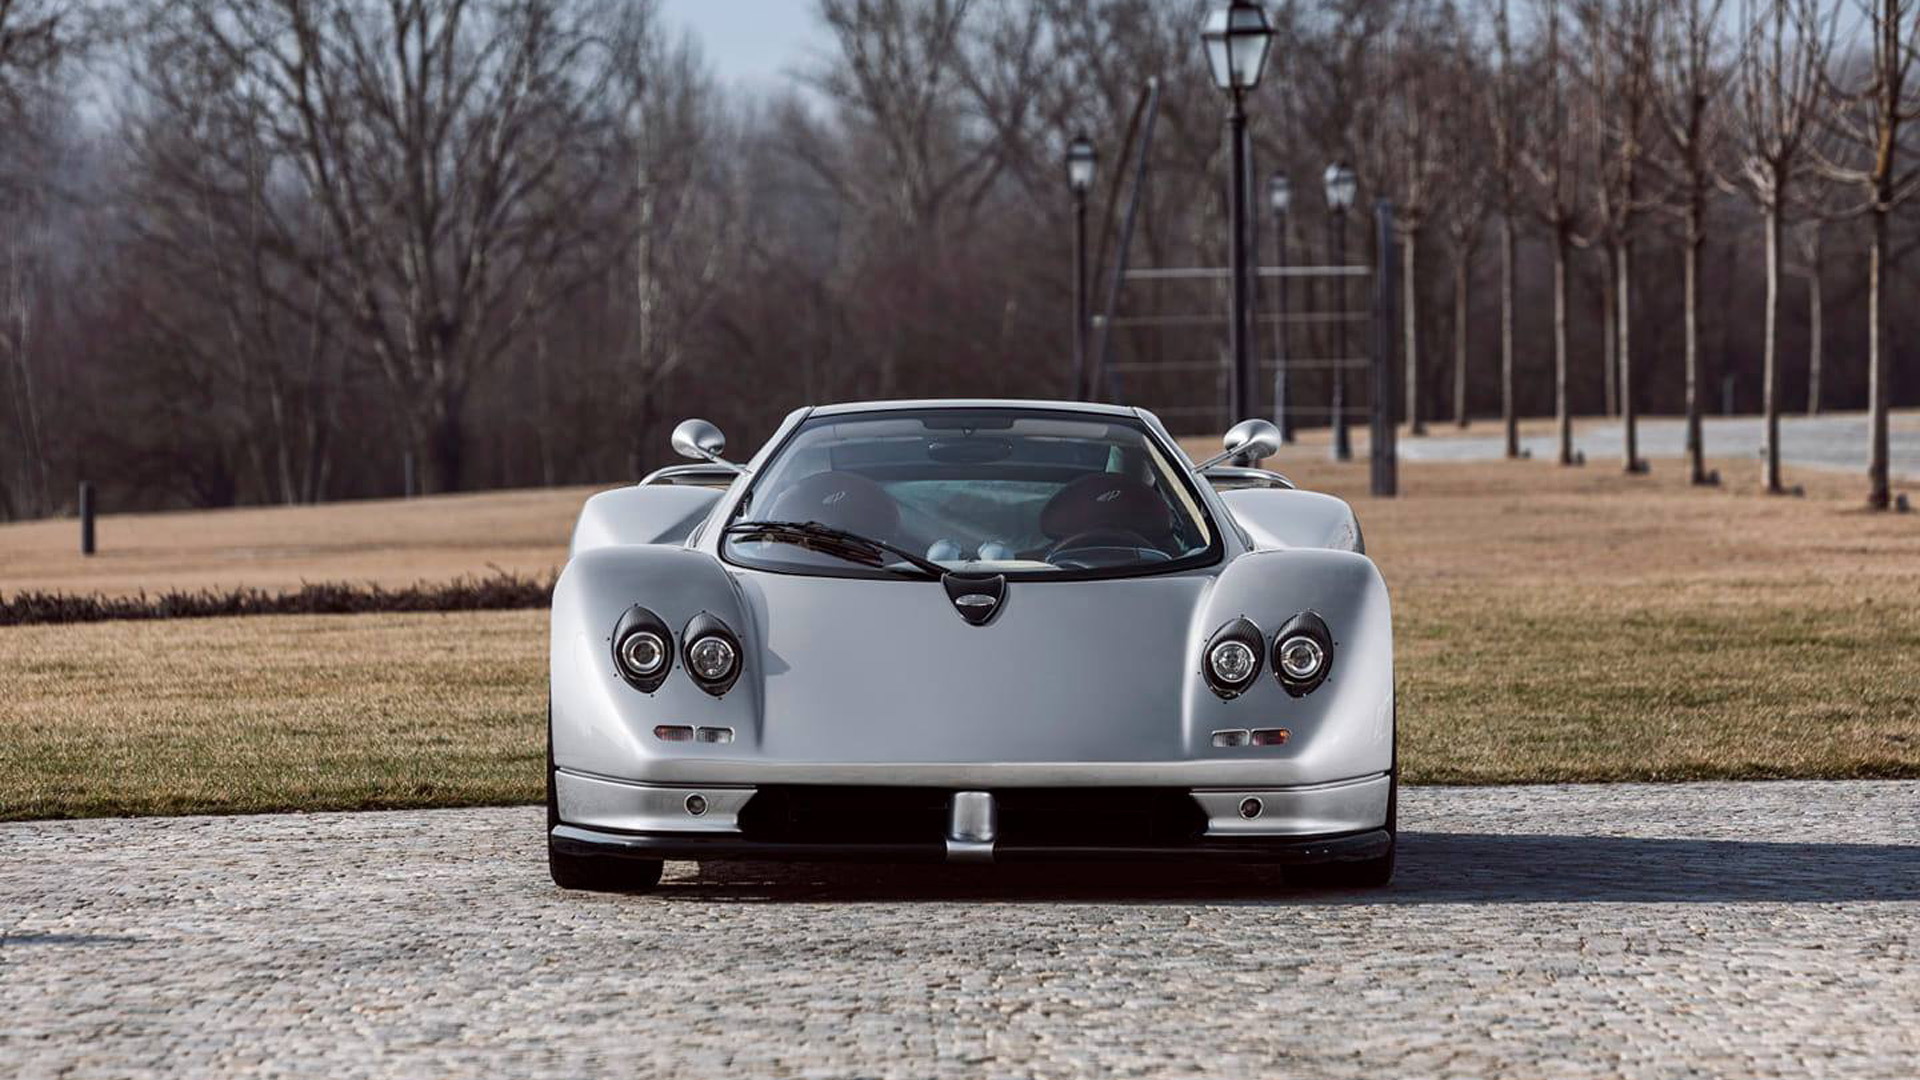 Pagani Zonda C12 with chassis number ending in 001